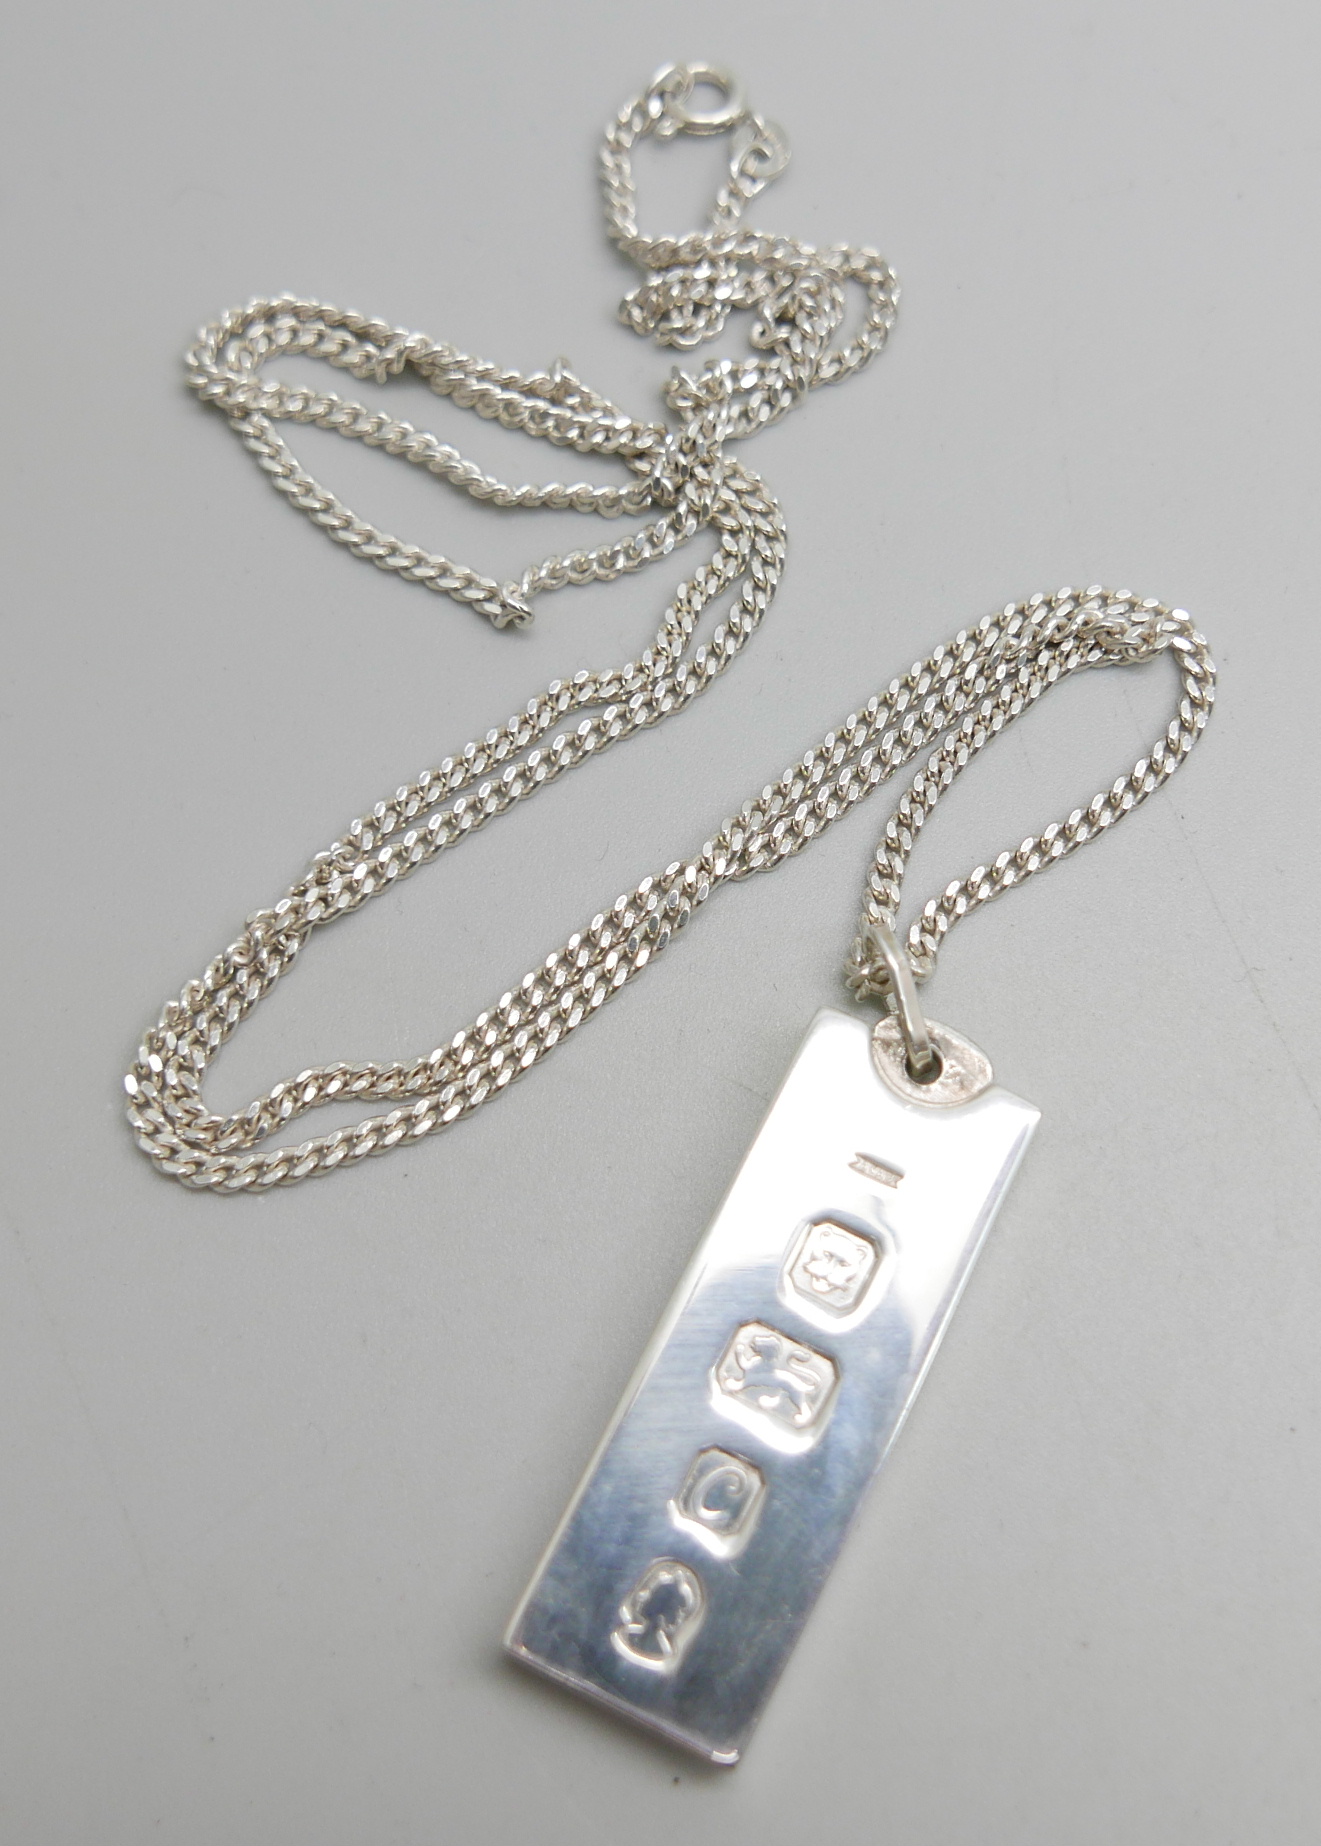 A silver ingot pendant and chain, 45g, chain 68cm